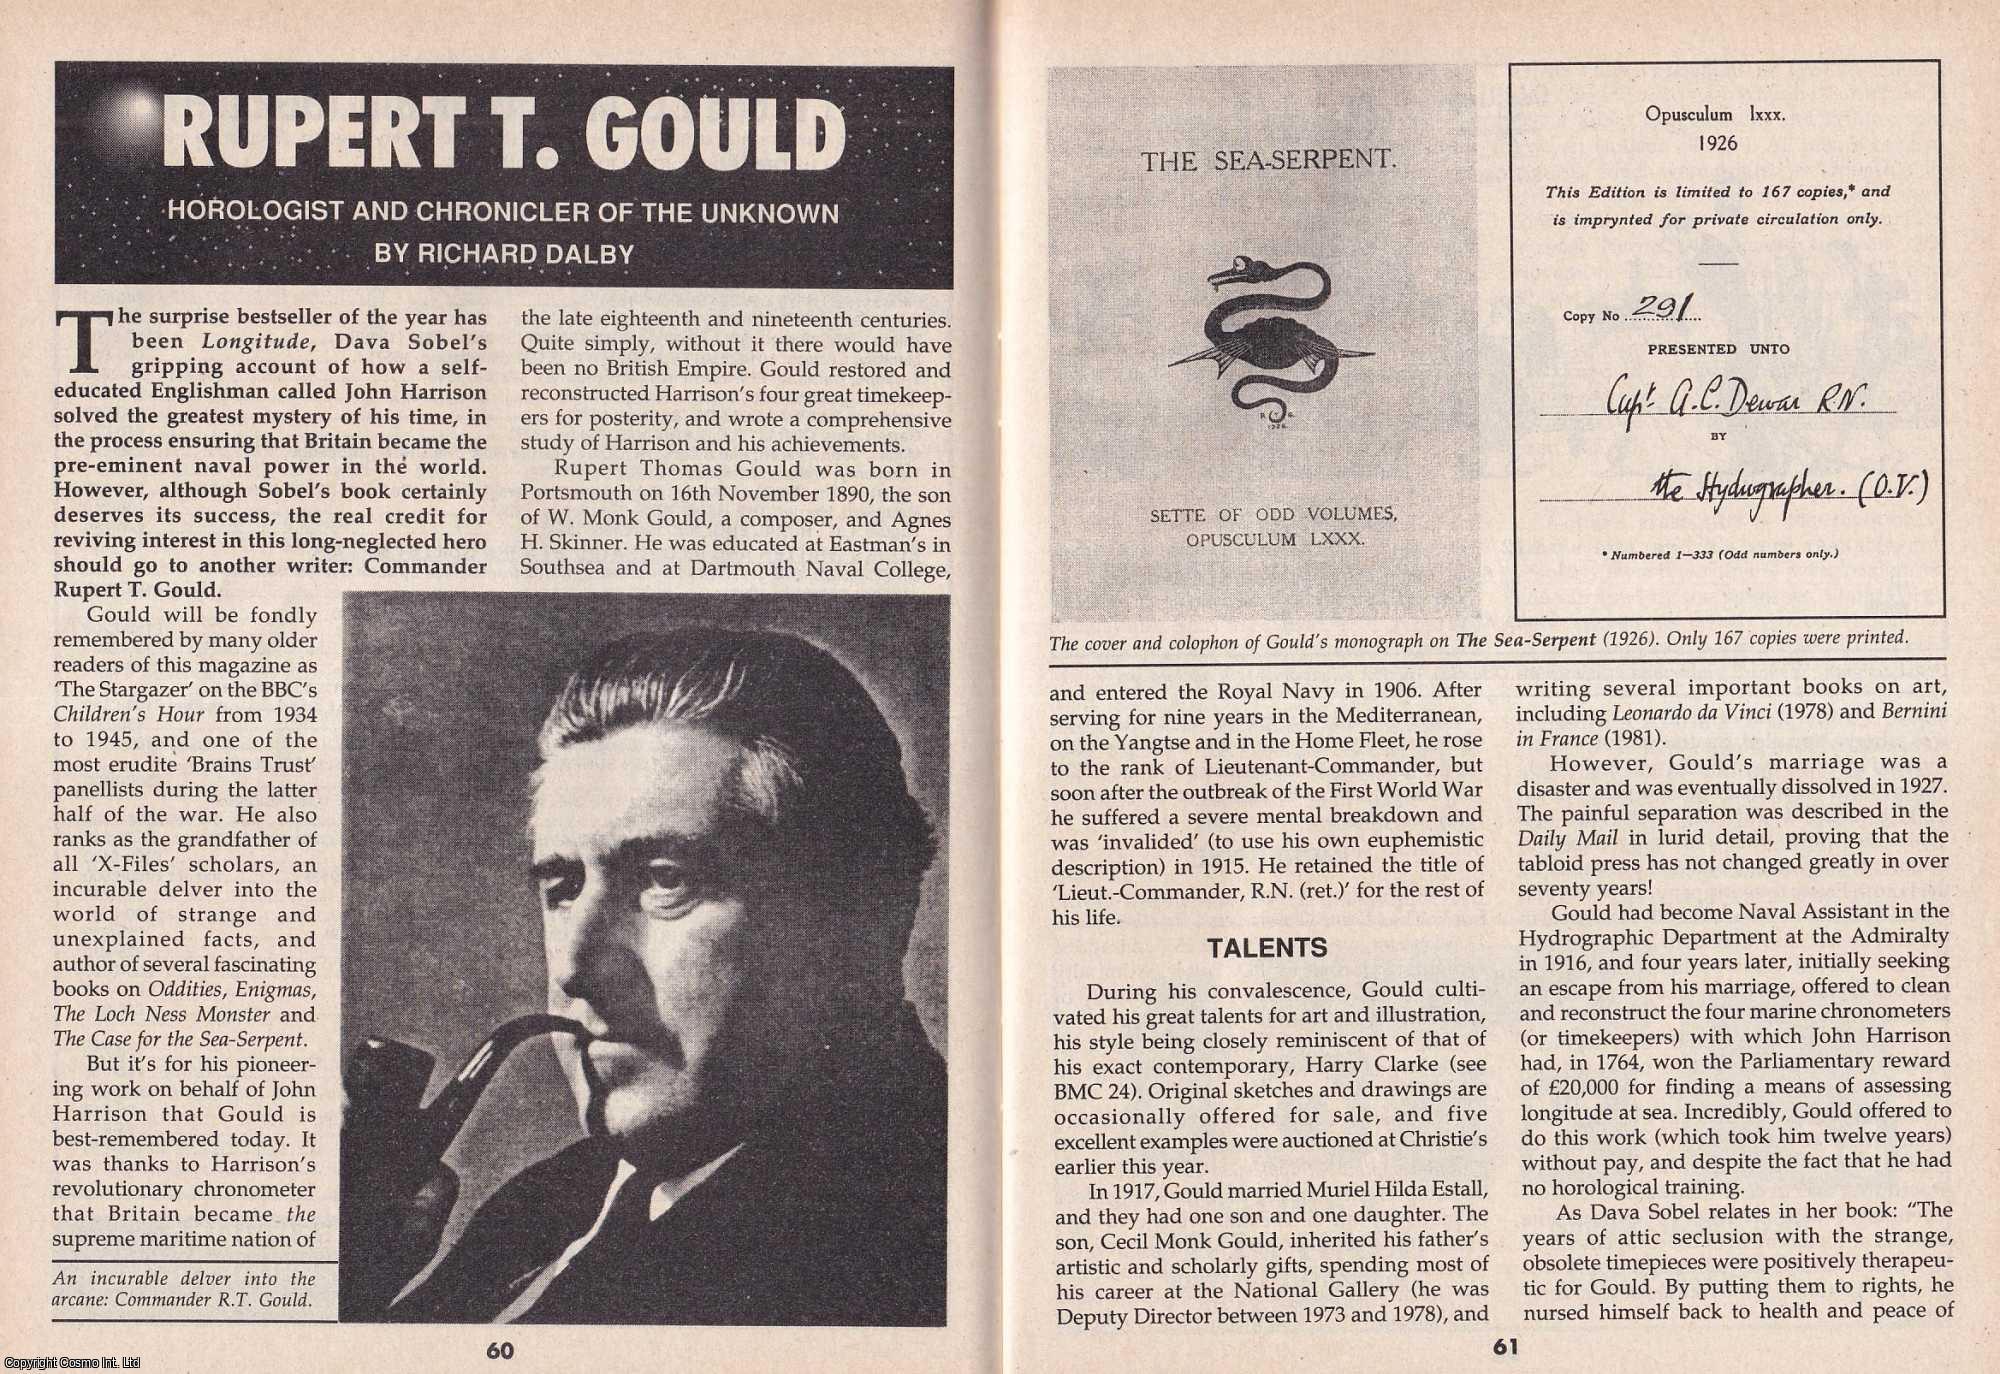 Richard Dalby - Rupert T. Gould. Horologist and Chronicler of The Unknown. This is an original article separated from an issue of The Book & Magazine Collector publication, 1996.